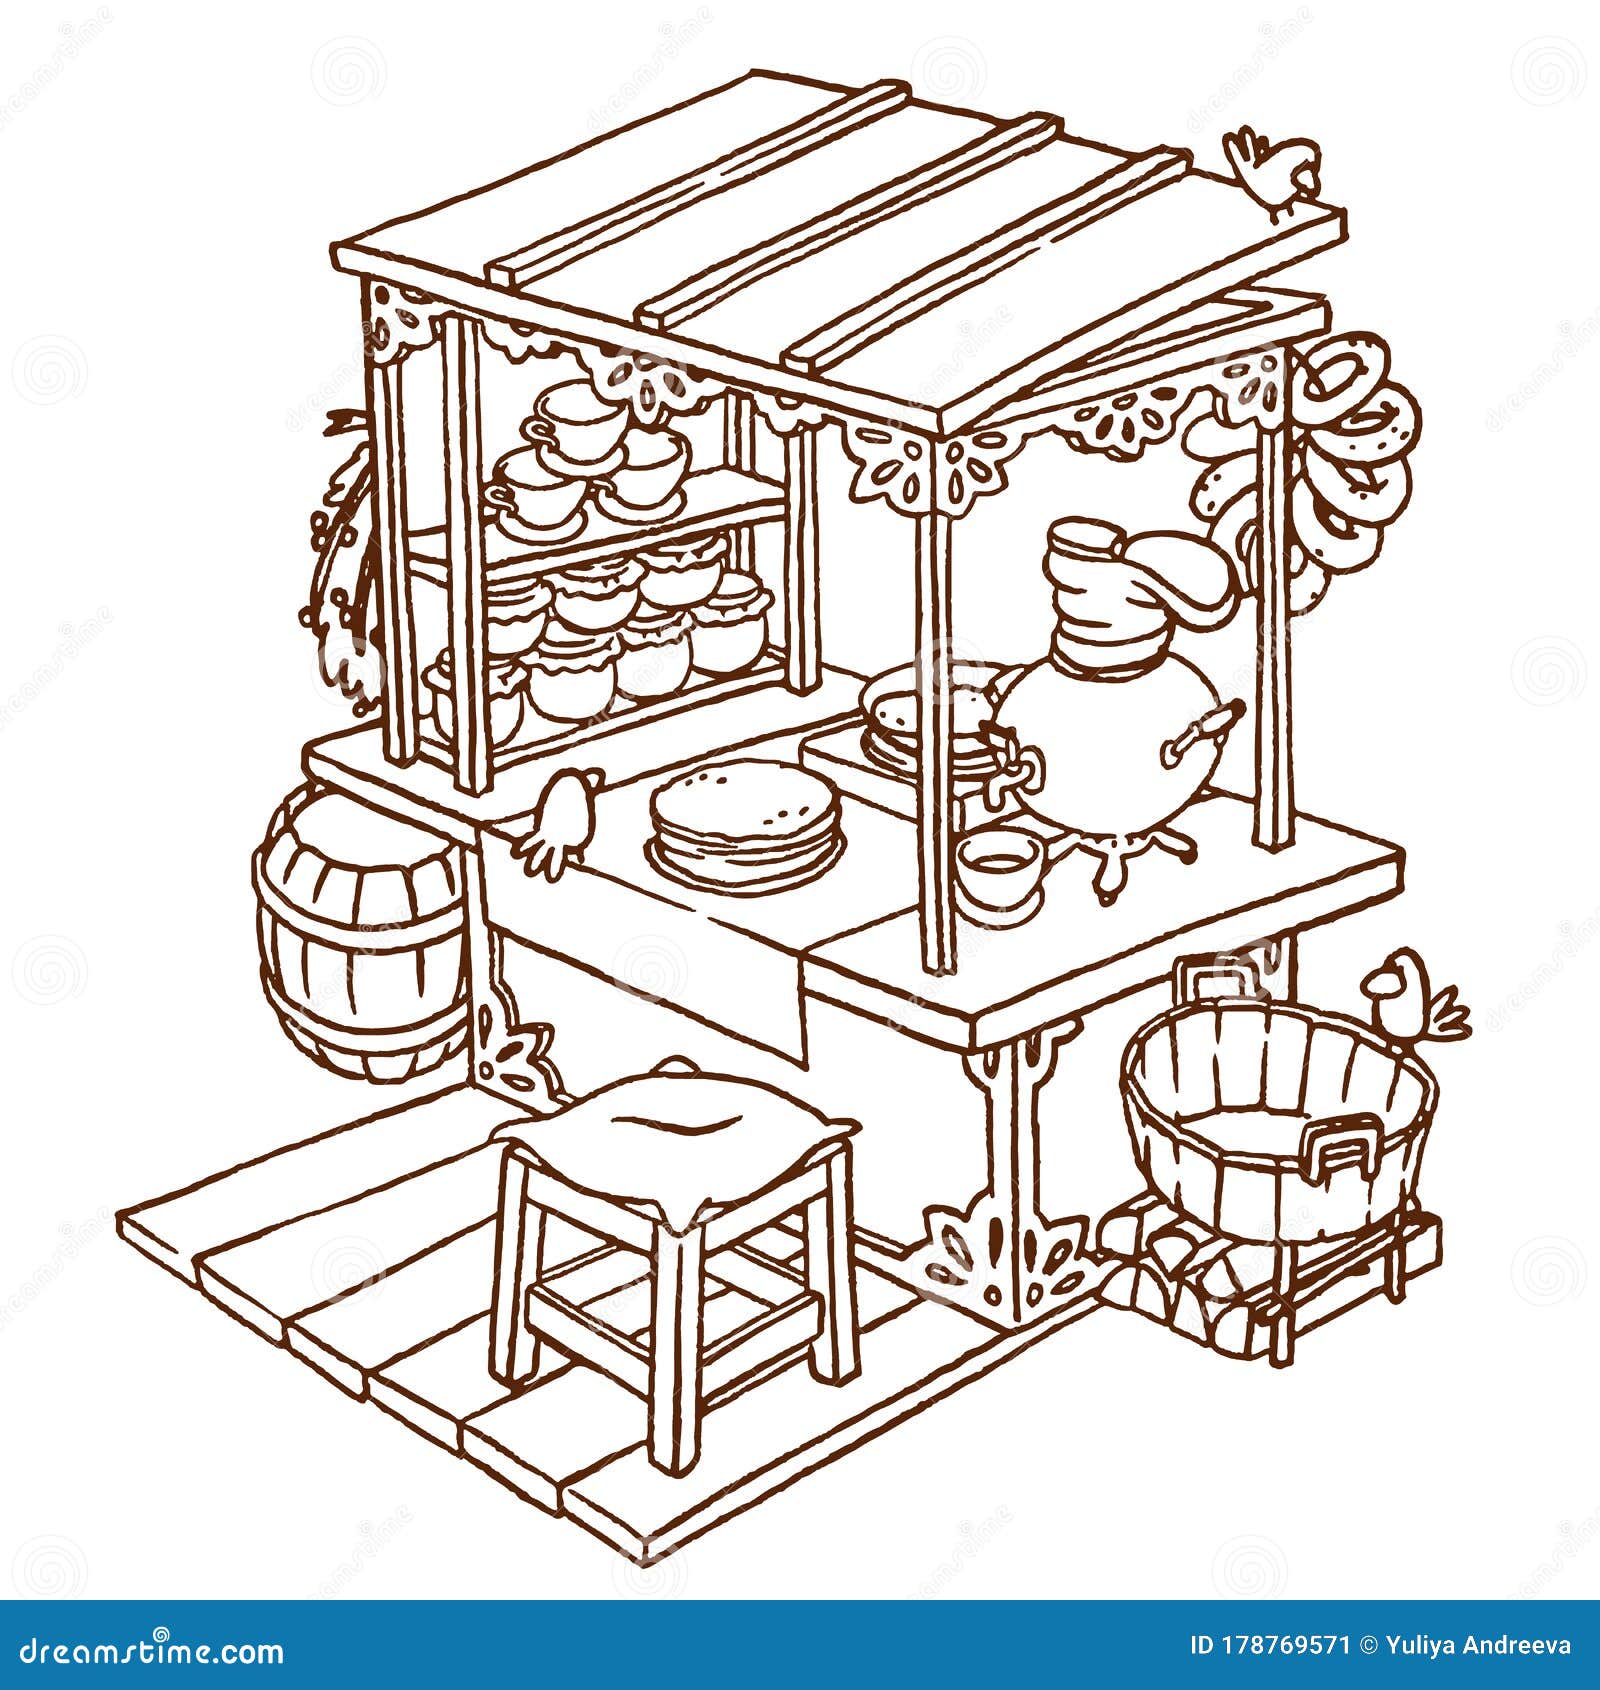 https://thumbs.dreamstime.com/z/black-white-outline-cartoon-isometric-store-storefront-vector-hand-drawn-food-market-coloring-page-178769571.jpg